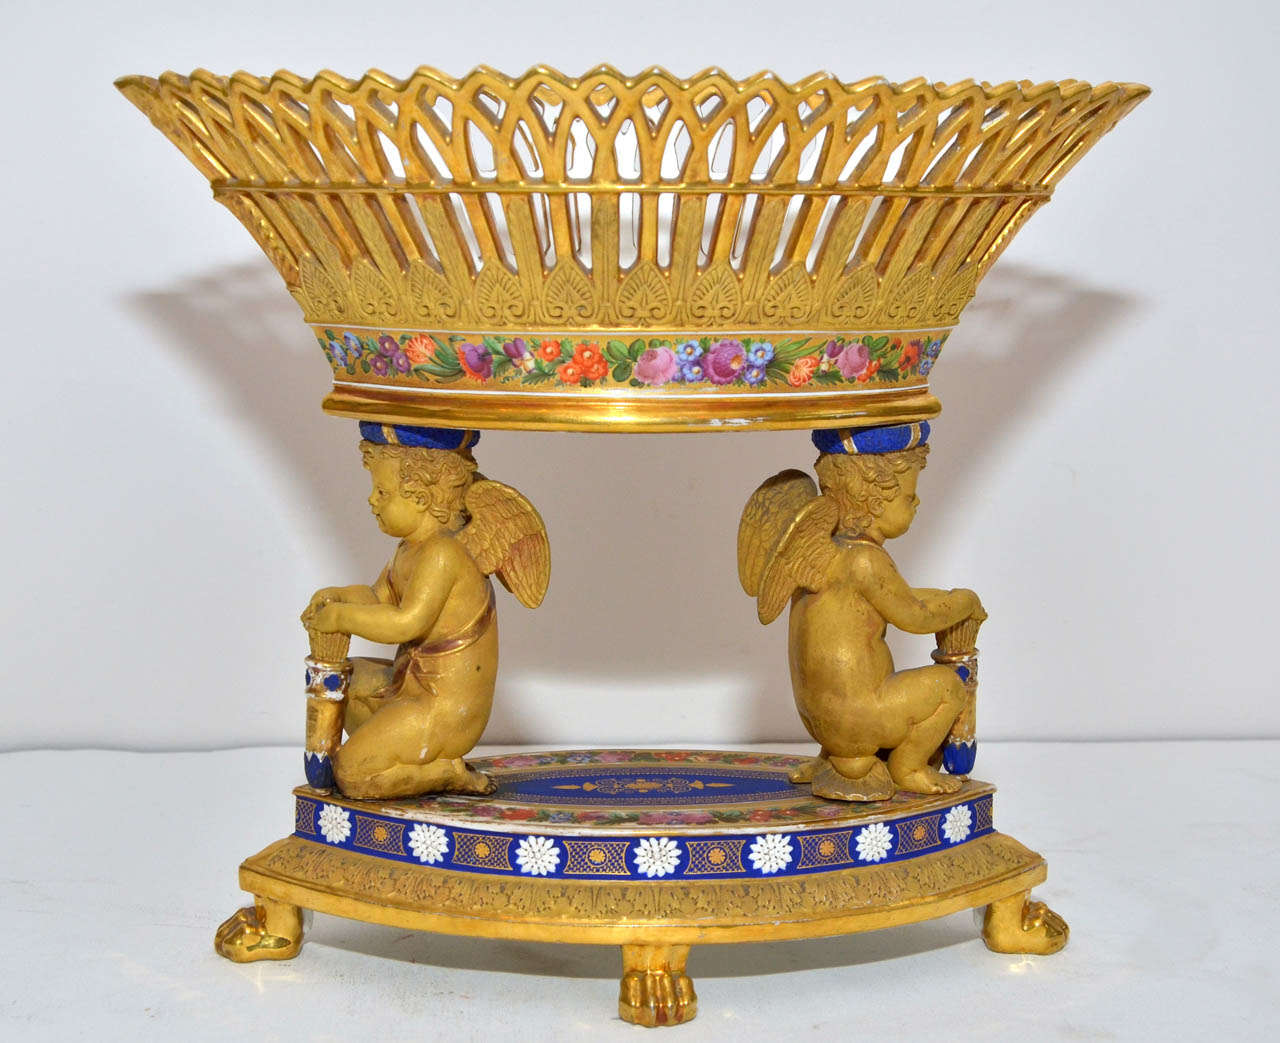 Very rare polychromatic and golden porcelain table centerpiece of the famous 